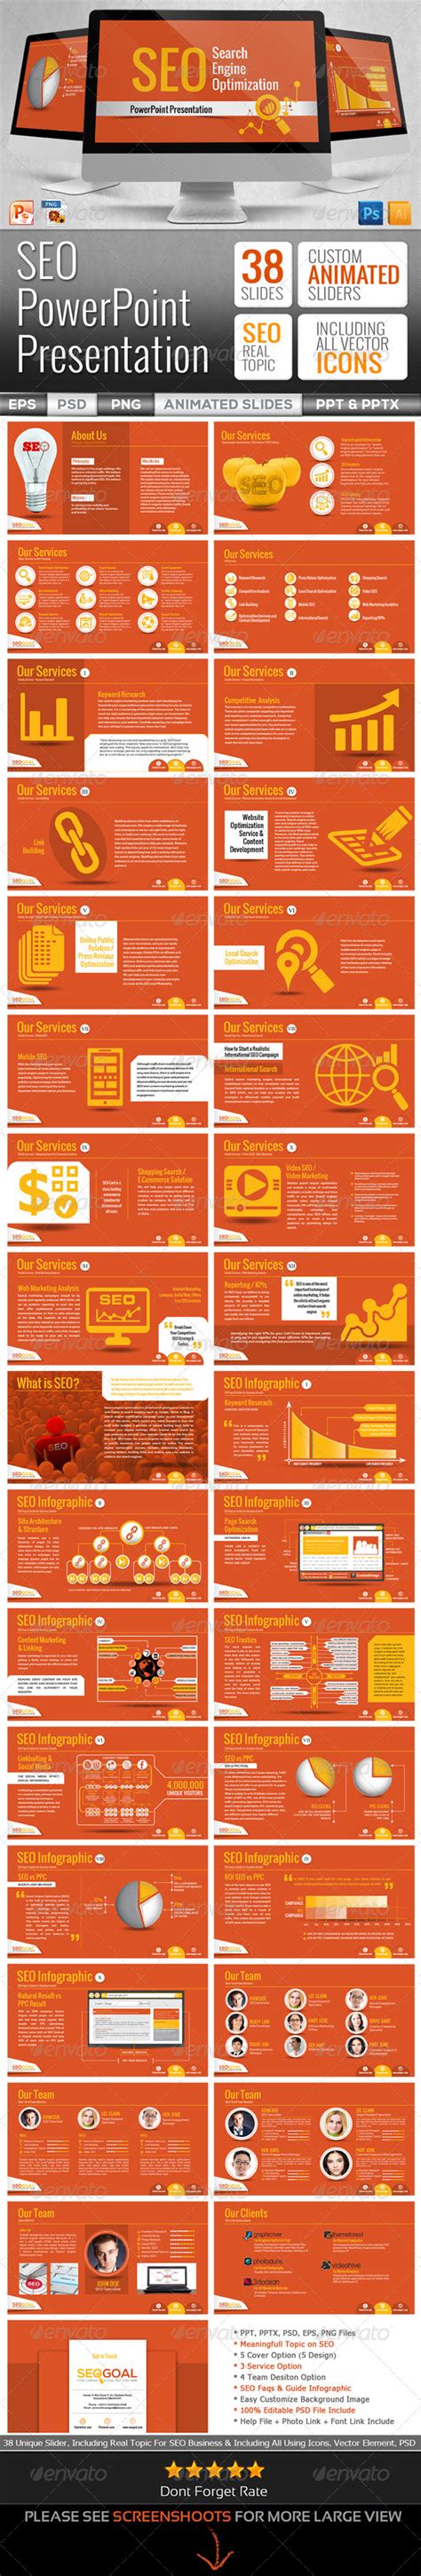 SEO Strategy PowerPoint Template #PowerPoint #Strategy #SEO #Template ...